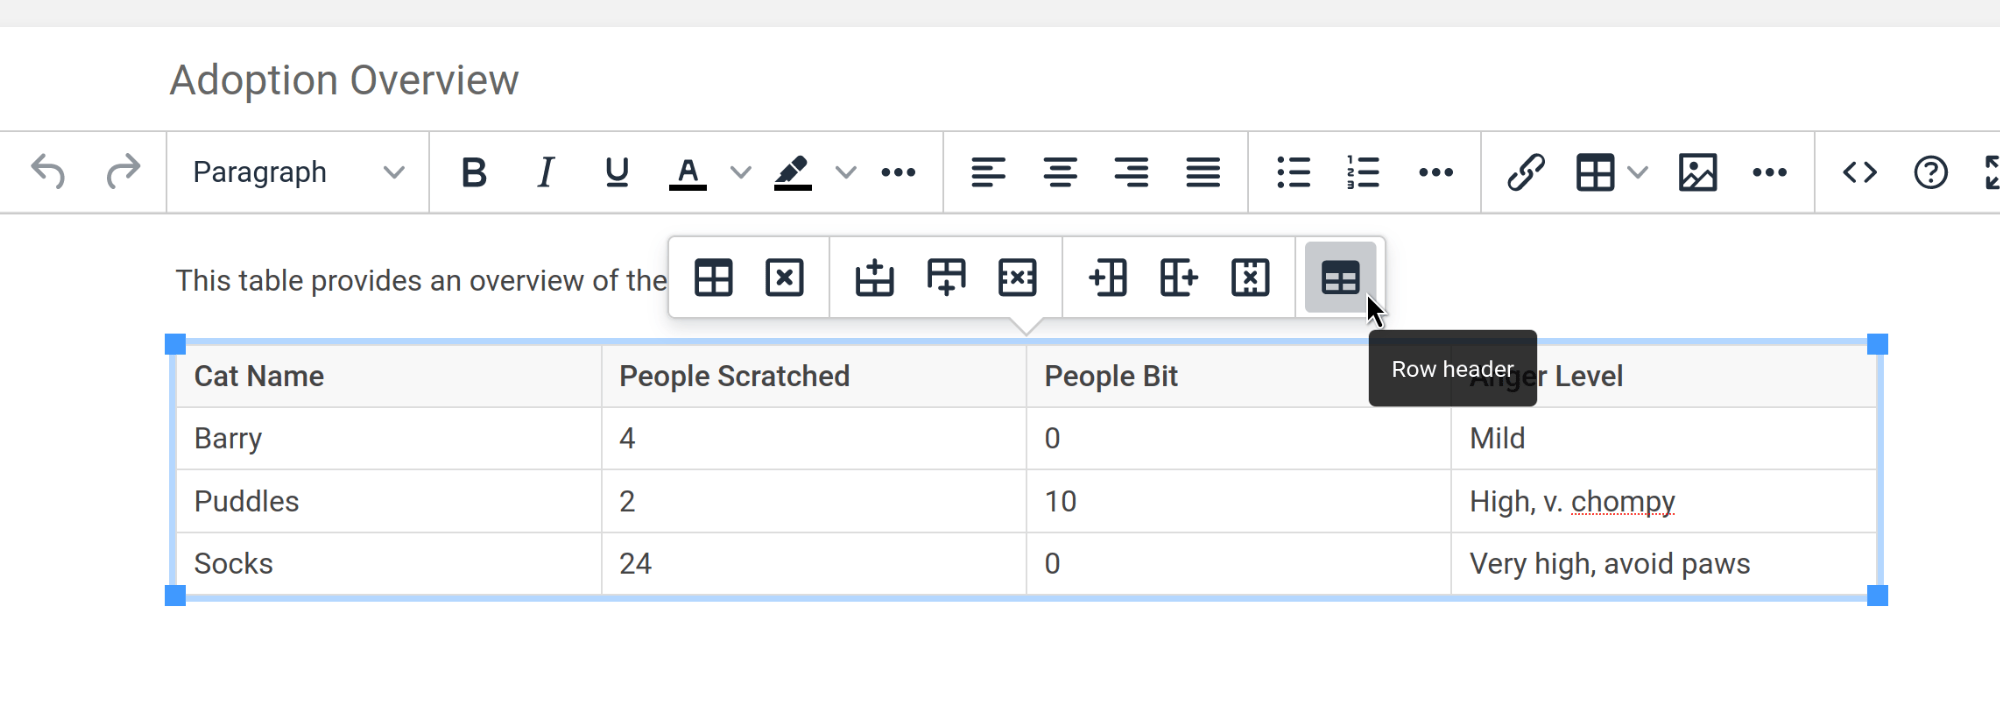 View of the BookStack page WYSIWYG editor. A table has been added describing various cats. The table is selected with a toolbar shown above it. The cursor is hovering over a &ldquo;Row header&rdquo; button which is currently active, reflecting the different shading of the top row of the table